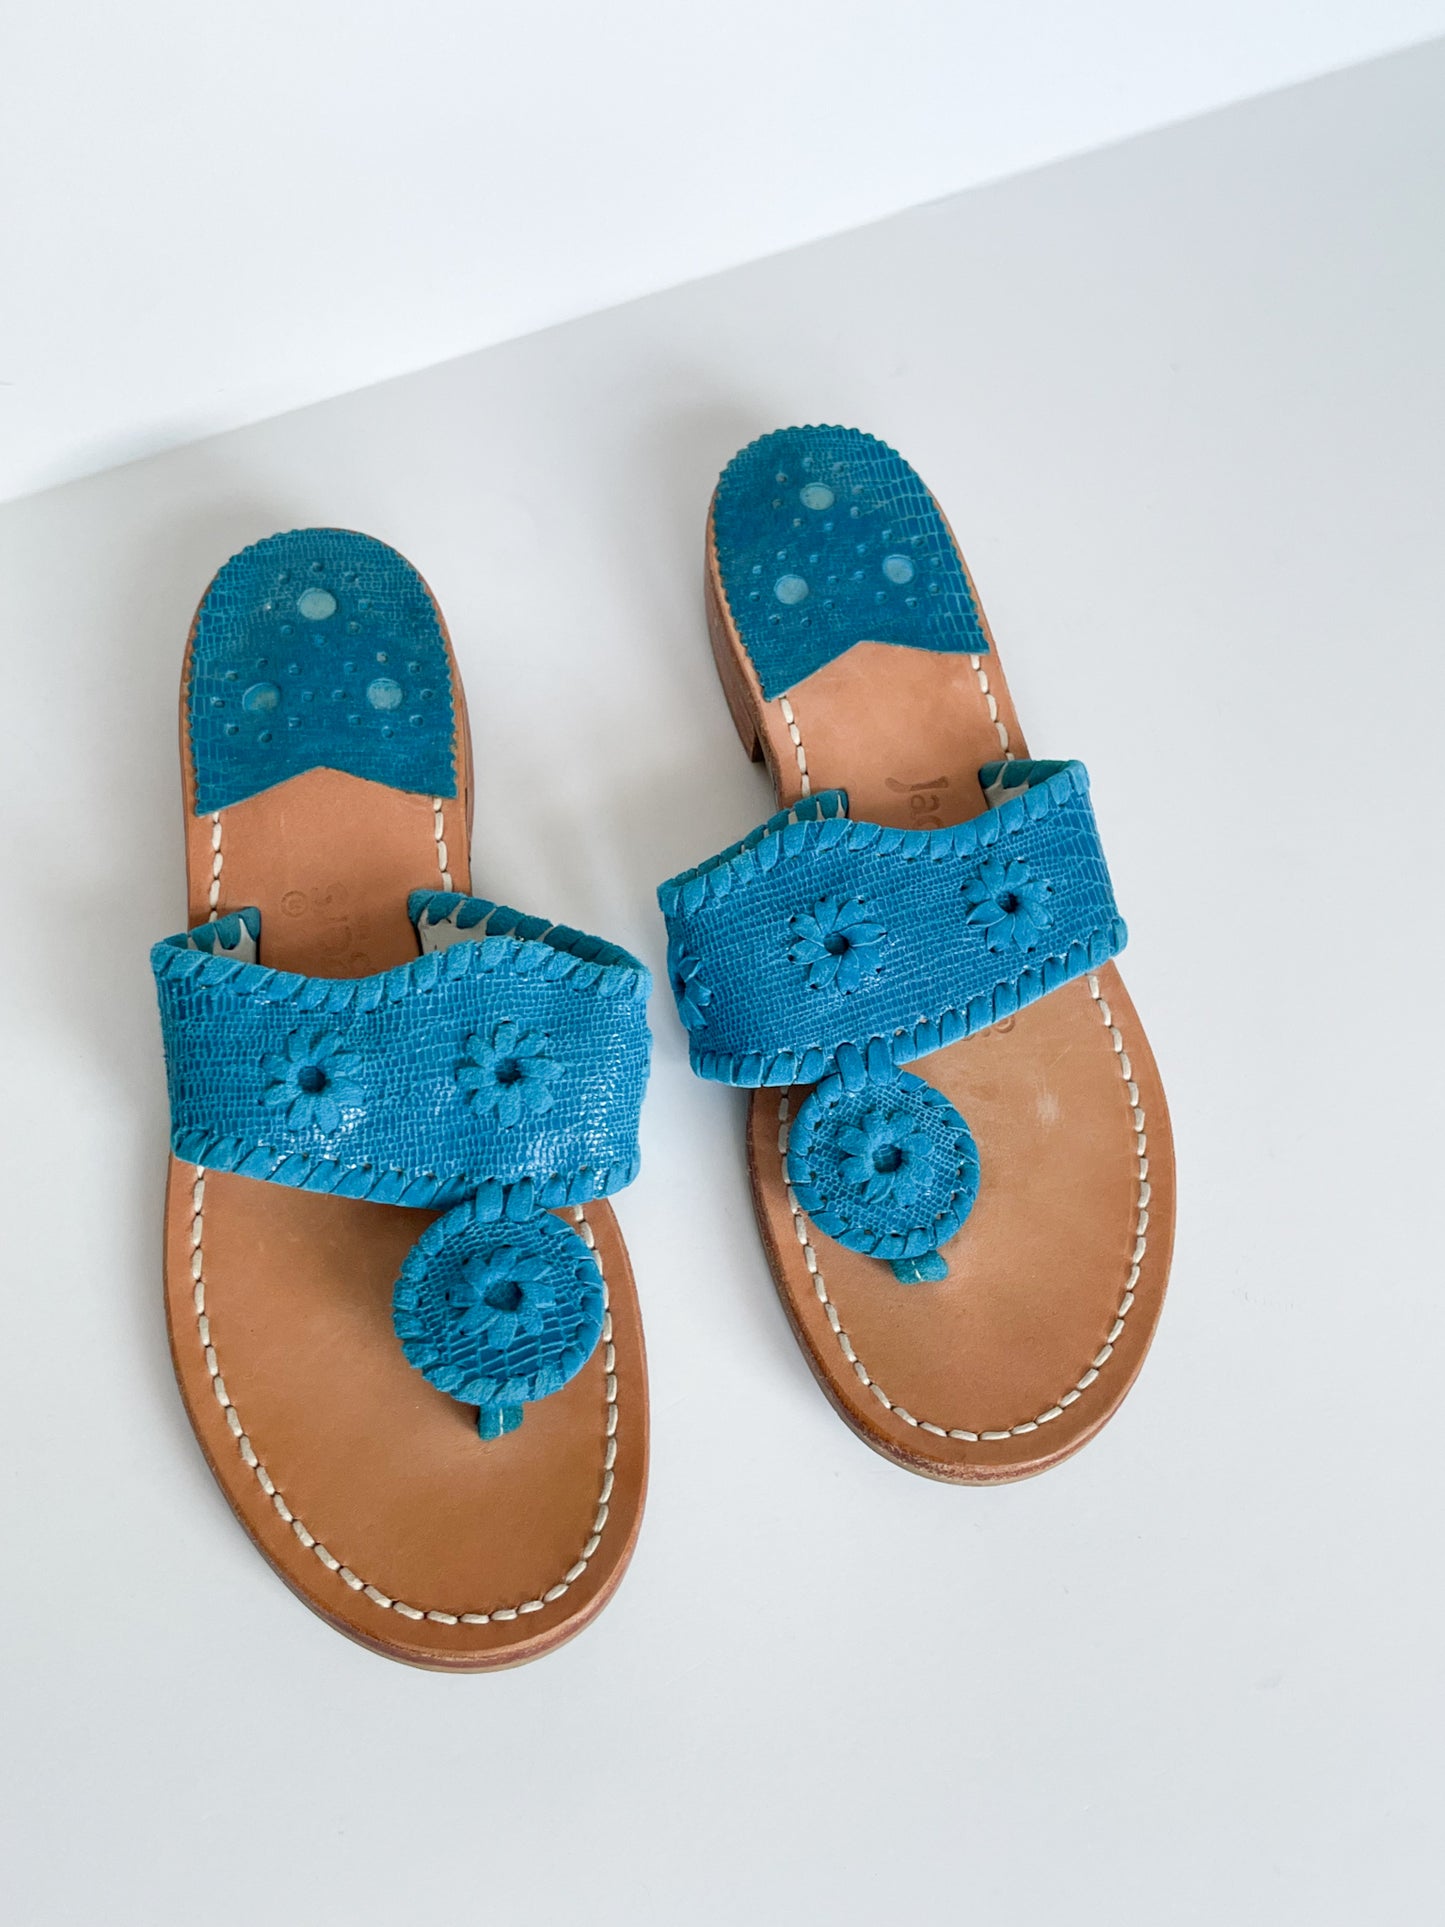 Jack Rogers Leather Turquoise Flat Slide Sandals - Size 5